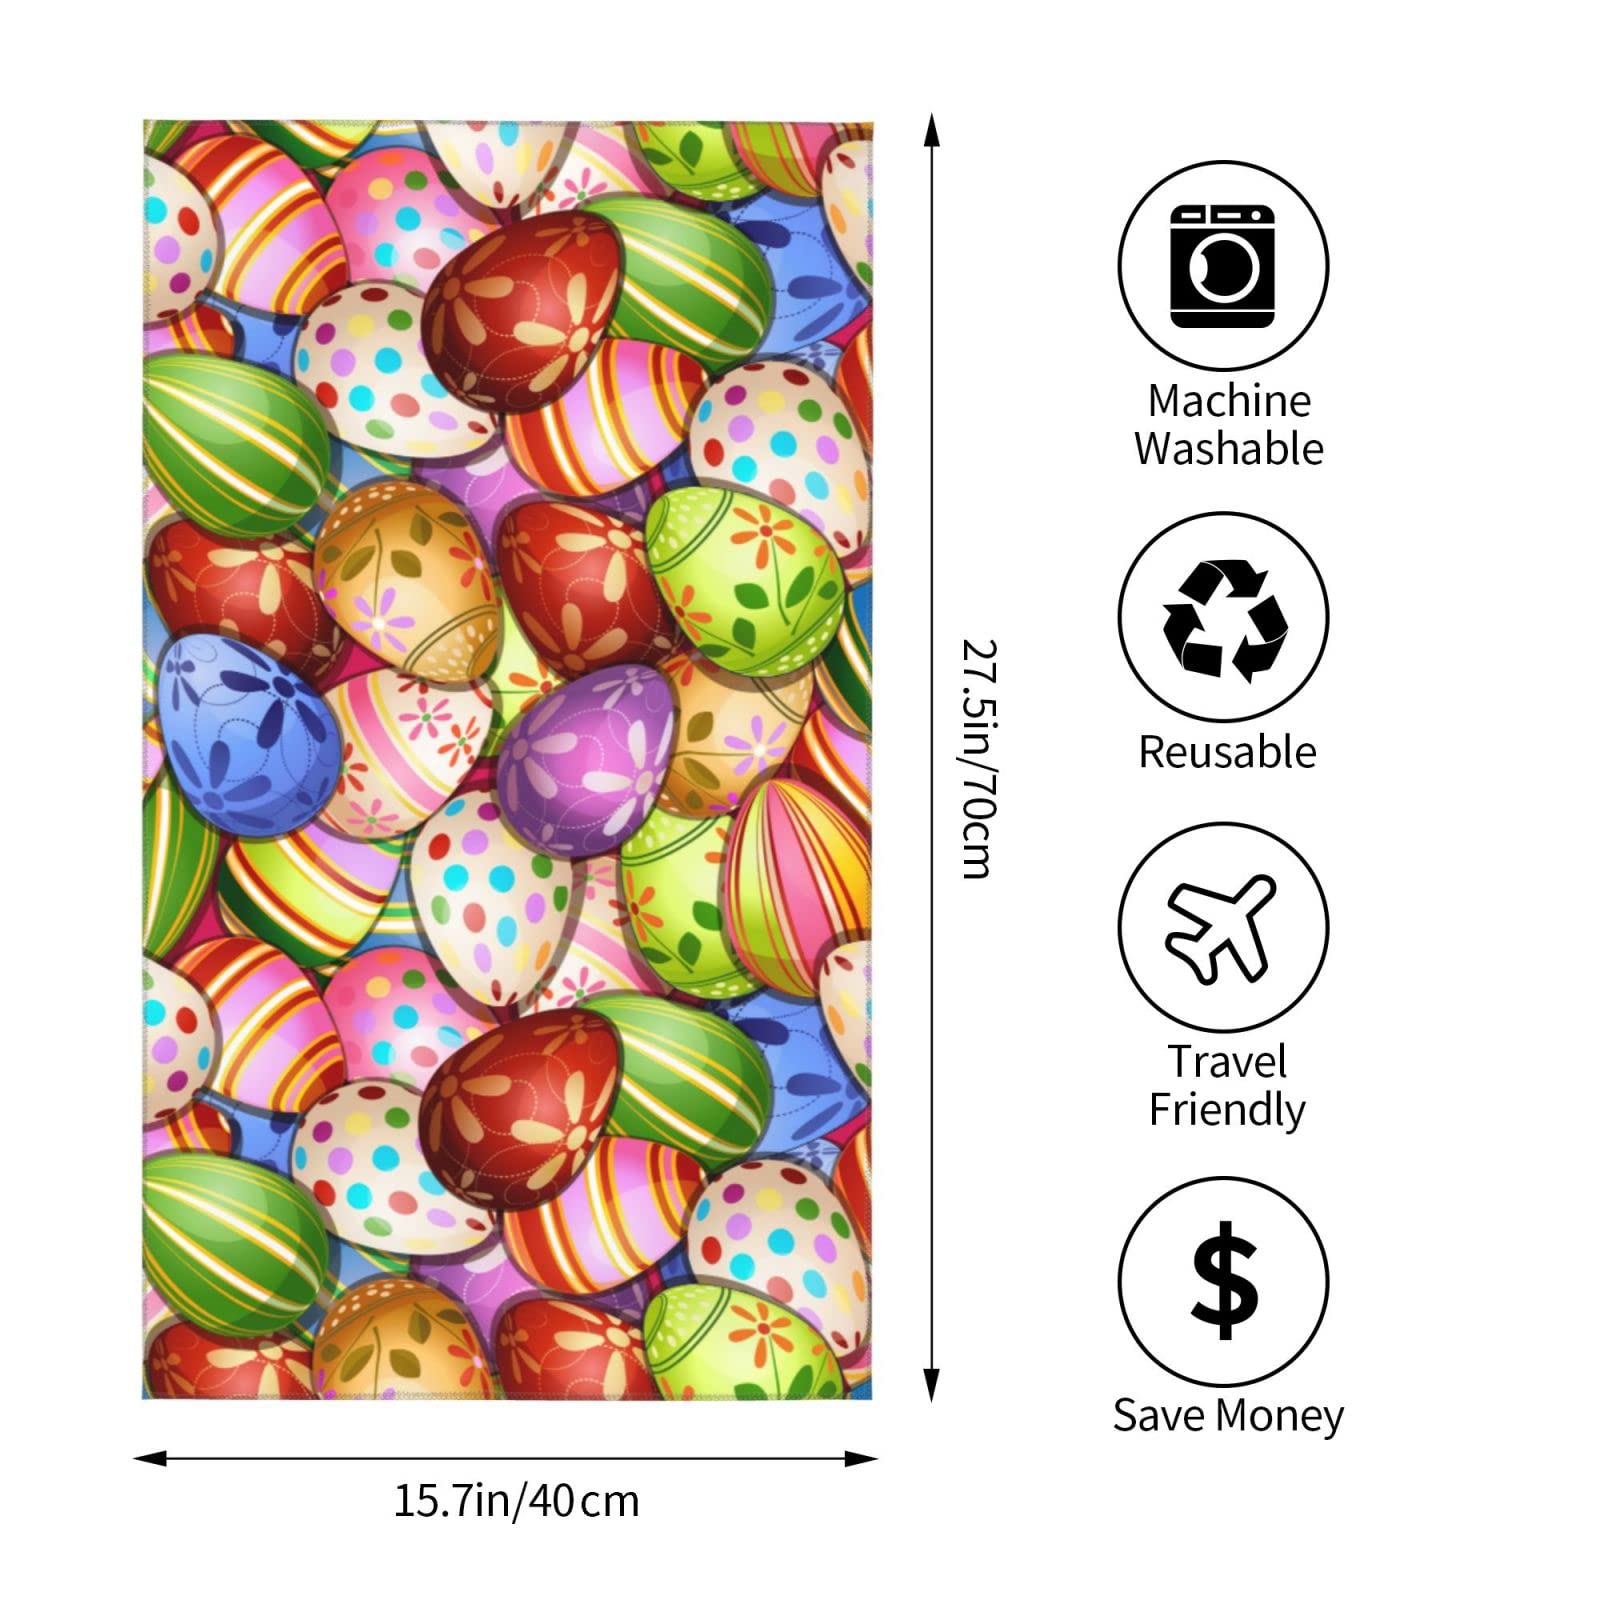 Heantstoy Colorful Eggs Easter Spring Holiday Hand Towel Soft Bath Towel Kitchen Tea Dish Towels Bathroom Decorations Housewarming Gifts 27.5in X 15.7in